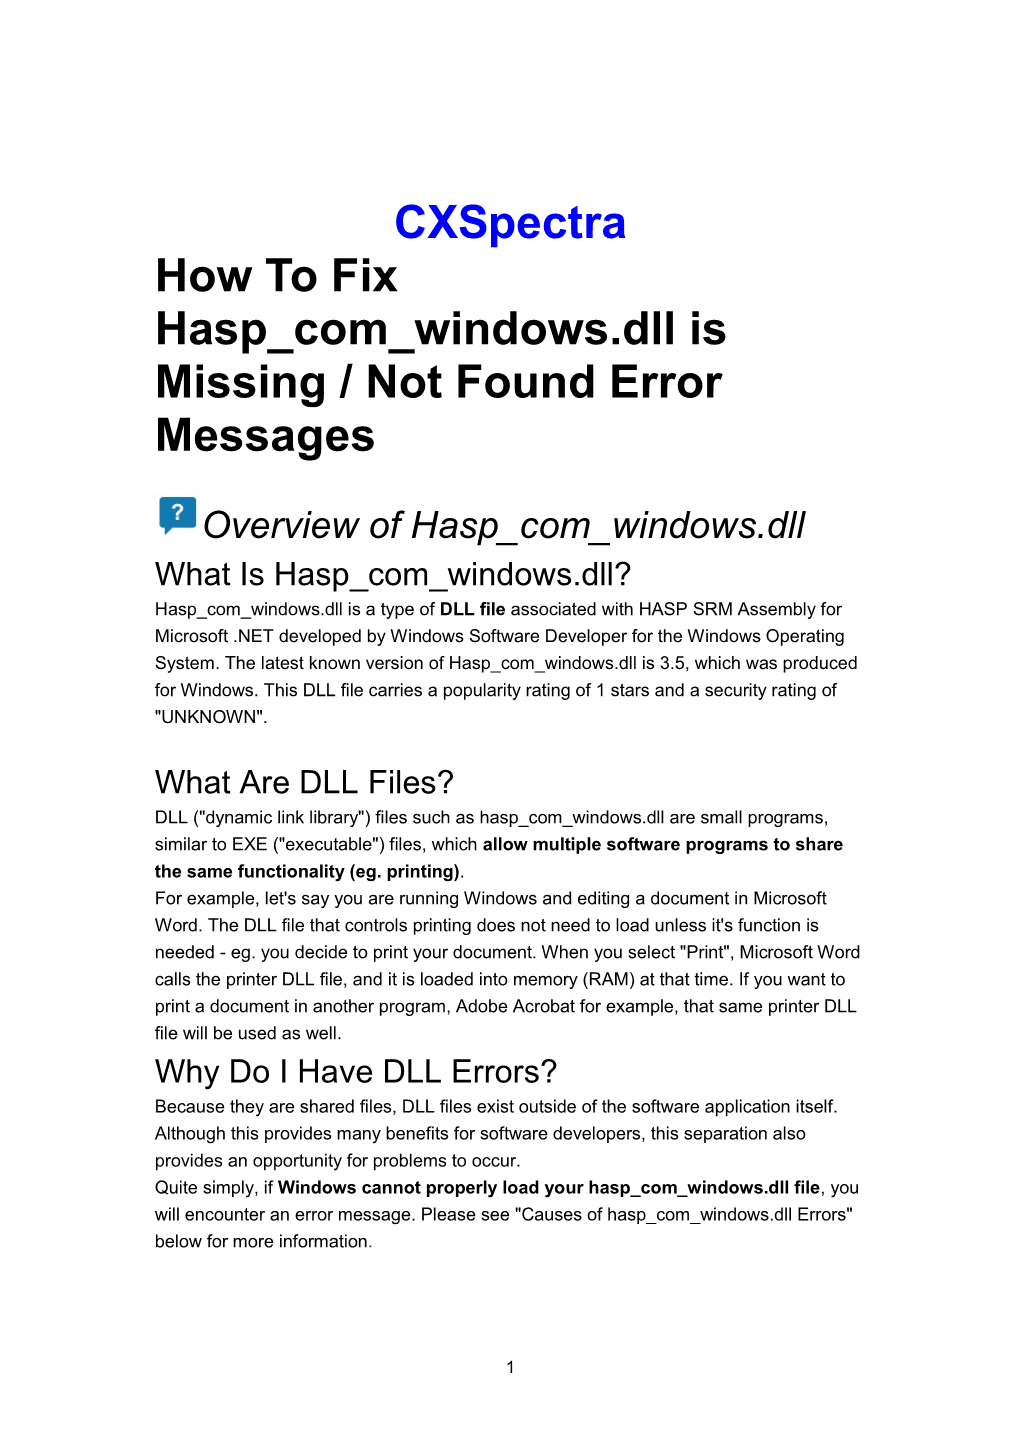 Cxspectra How to Fix Hasp Com Windows.Dll Is Missing / Not Found Error Messages